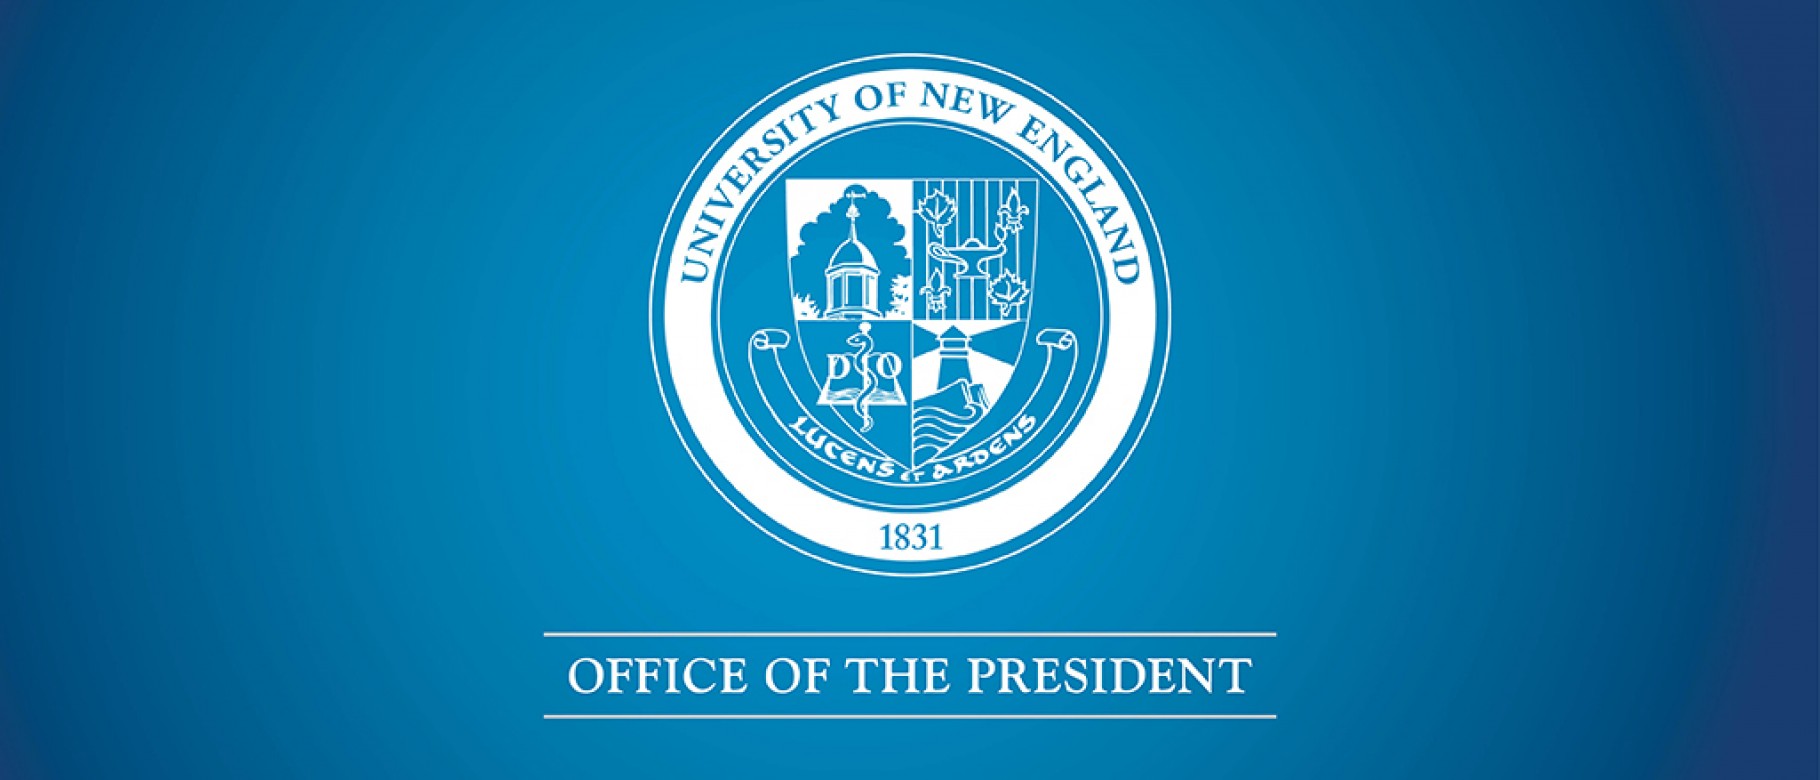 Seal of the Office of the President of the University of New England